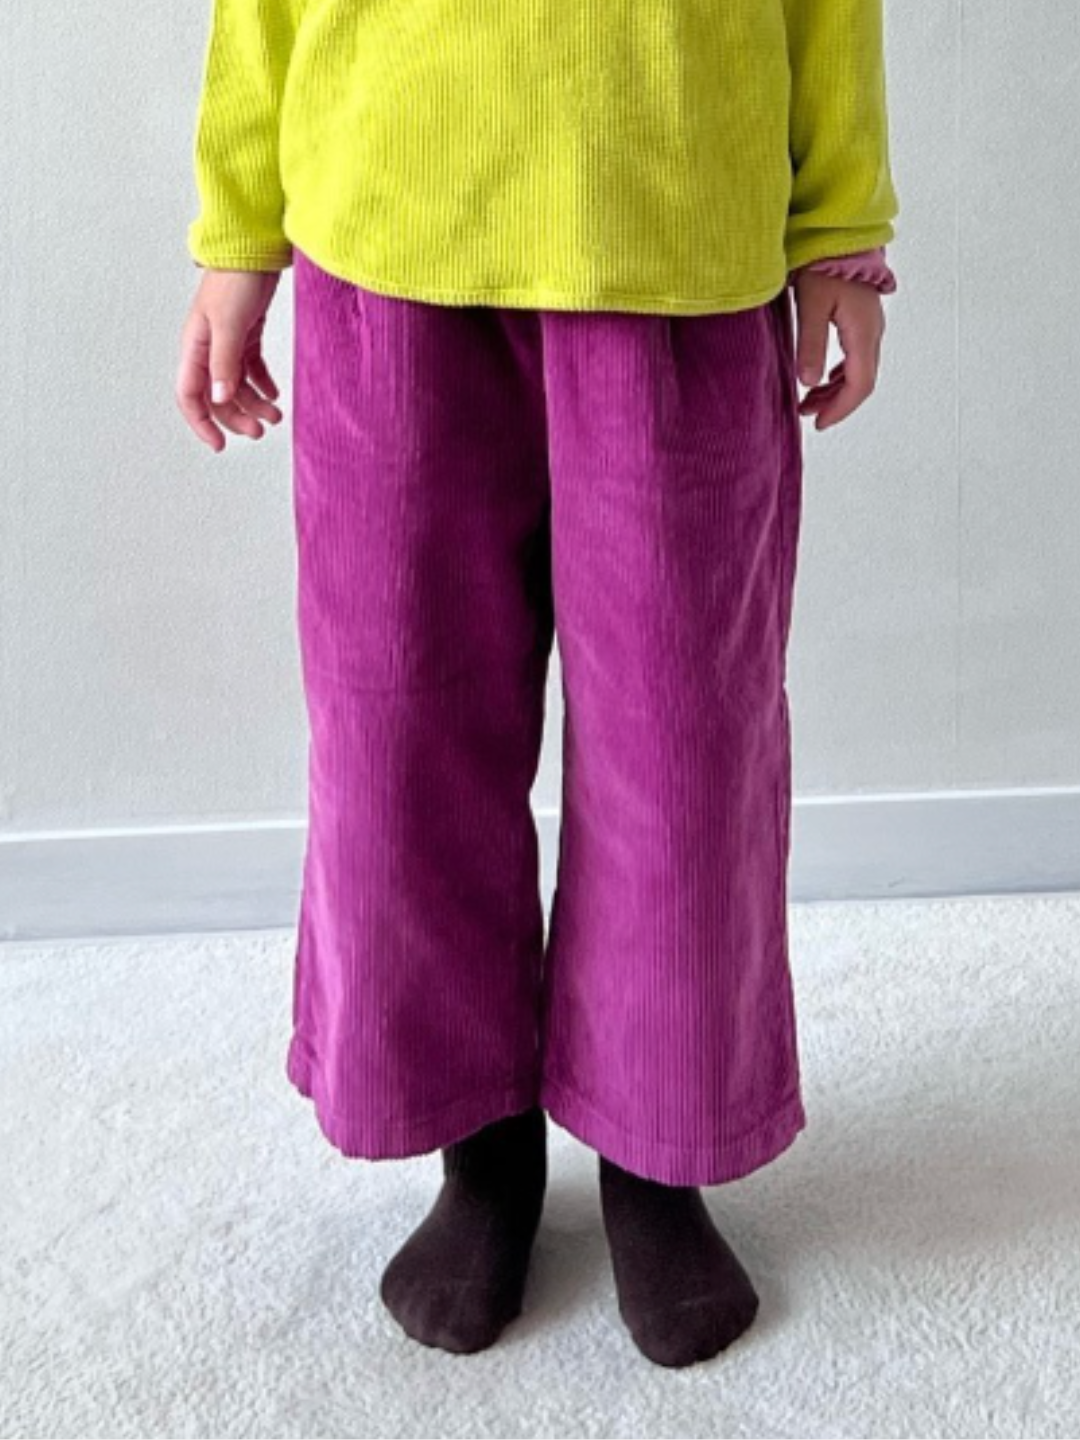 Magenta | Waist-down cropped image of a child wearing wide-leg corduroy pants in magenta pink, paired with a yellow shirt and dark brown socks, standing on grey carpet..